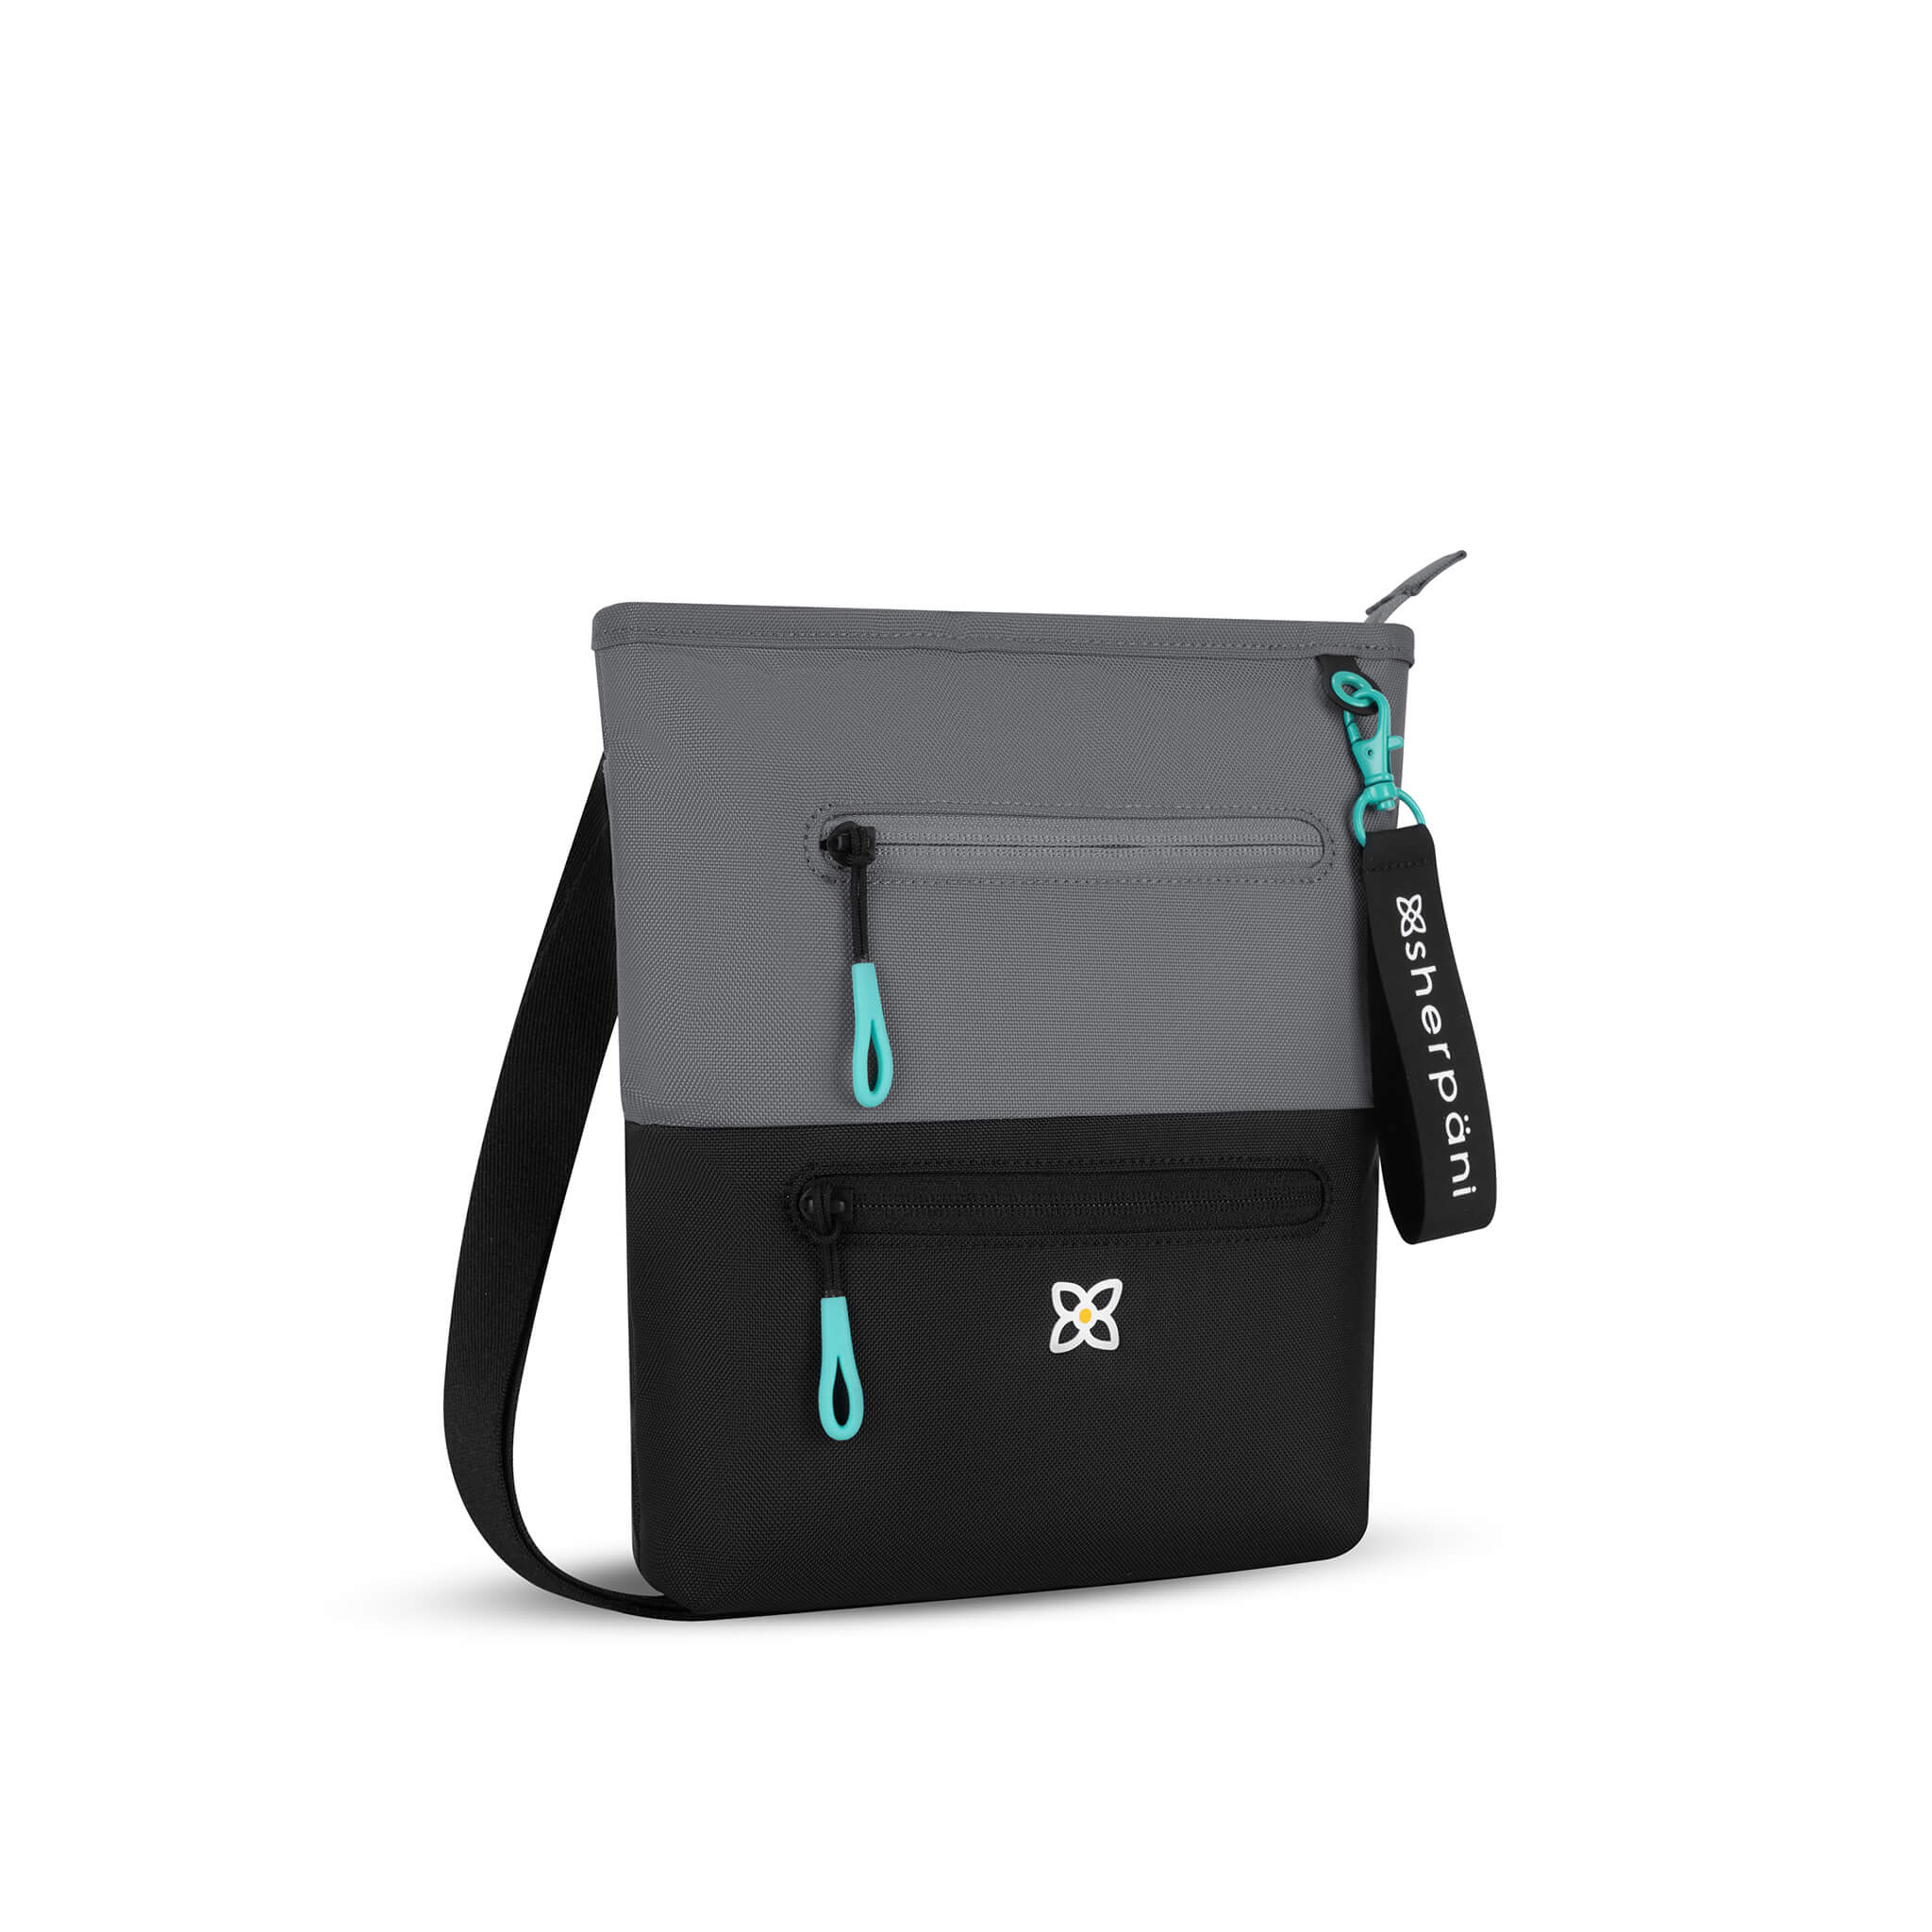 Angled front view of Sherpani crossbody travel bag, the Sadie in Moonstone. Sadie features include two front zipper pockets, a discrete side pocket, detachable keychain, adjustable crossbody strap, back slip pocket and RFID blocking technology. The Moonstone color is two-toned in gray and black with turquoise accents. #color_moonstone